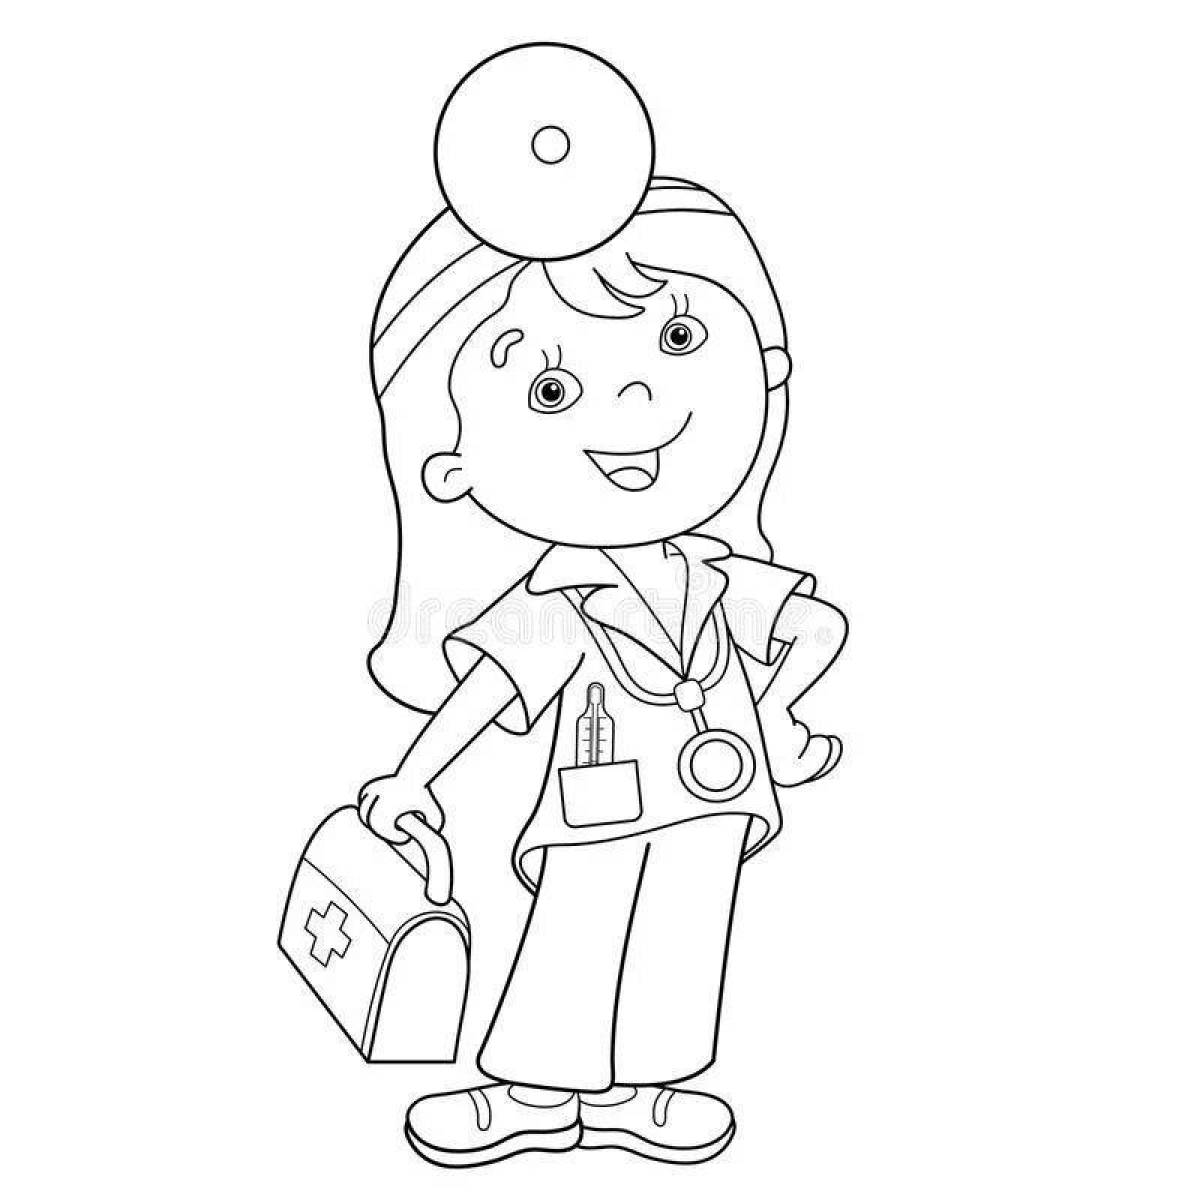 Coloring book fascinating doctor figurine